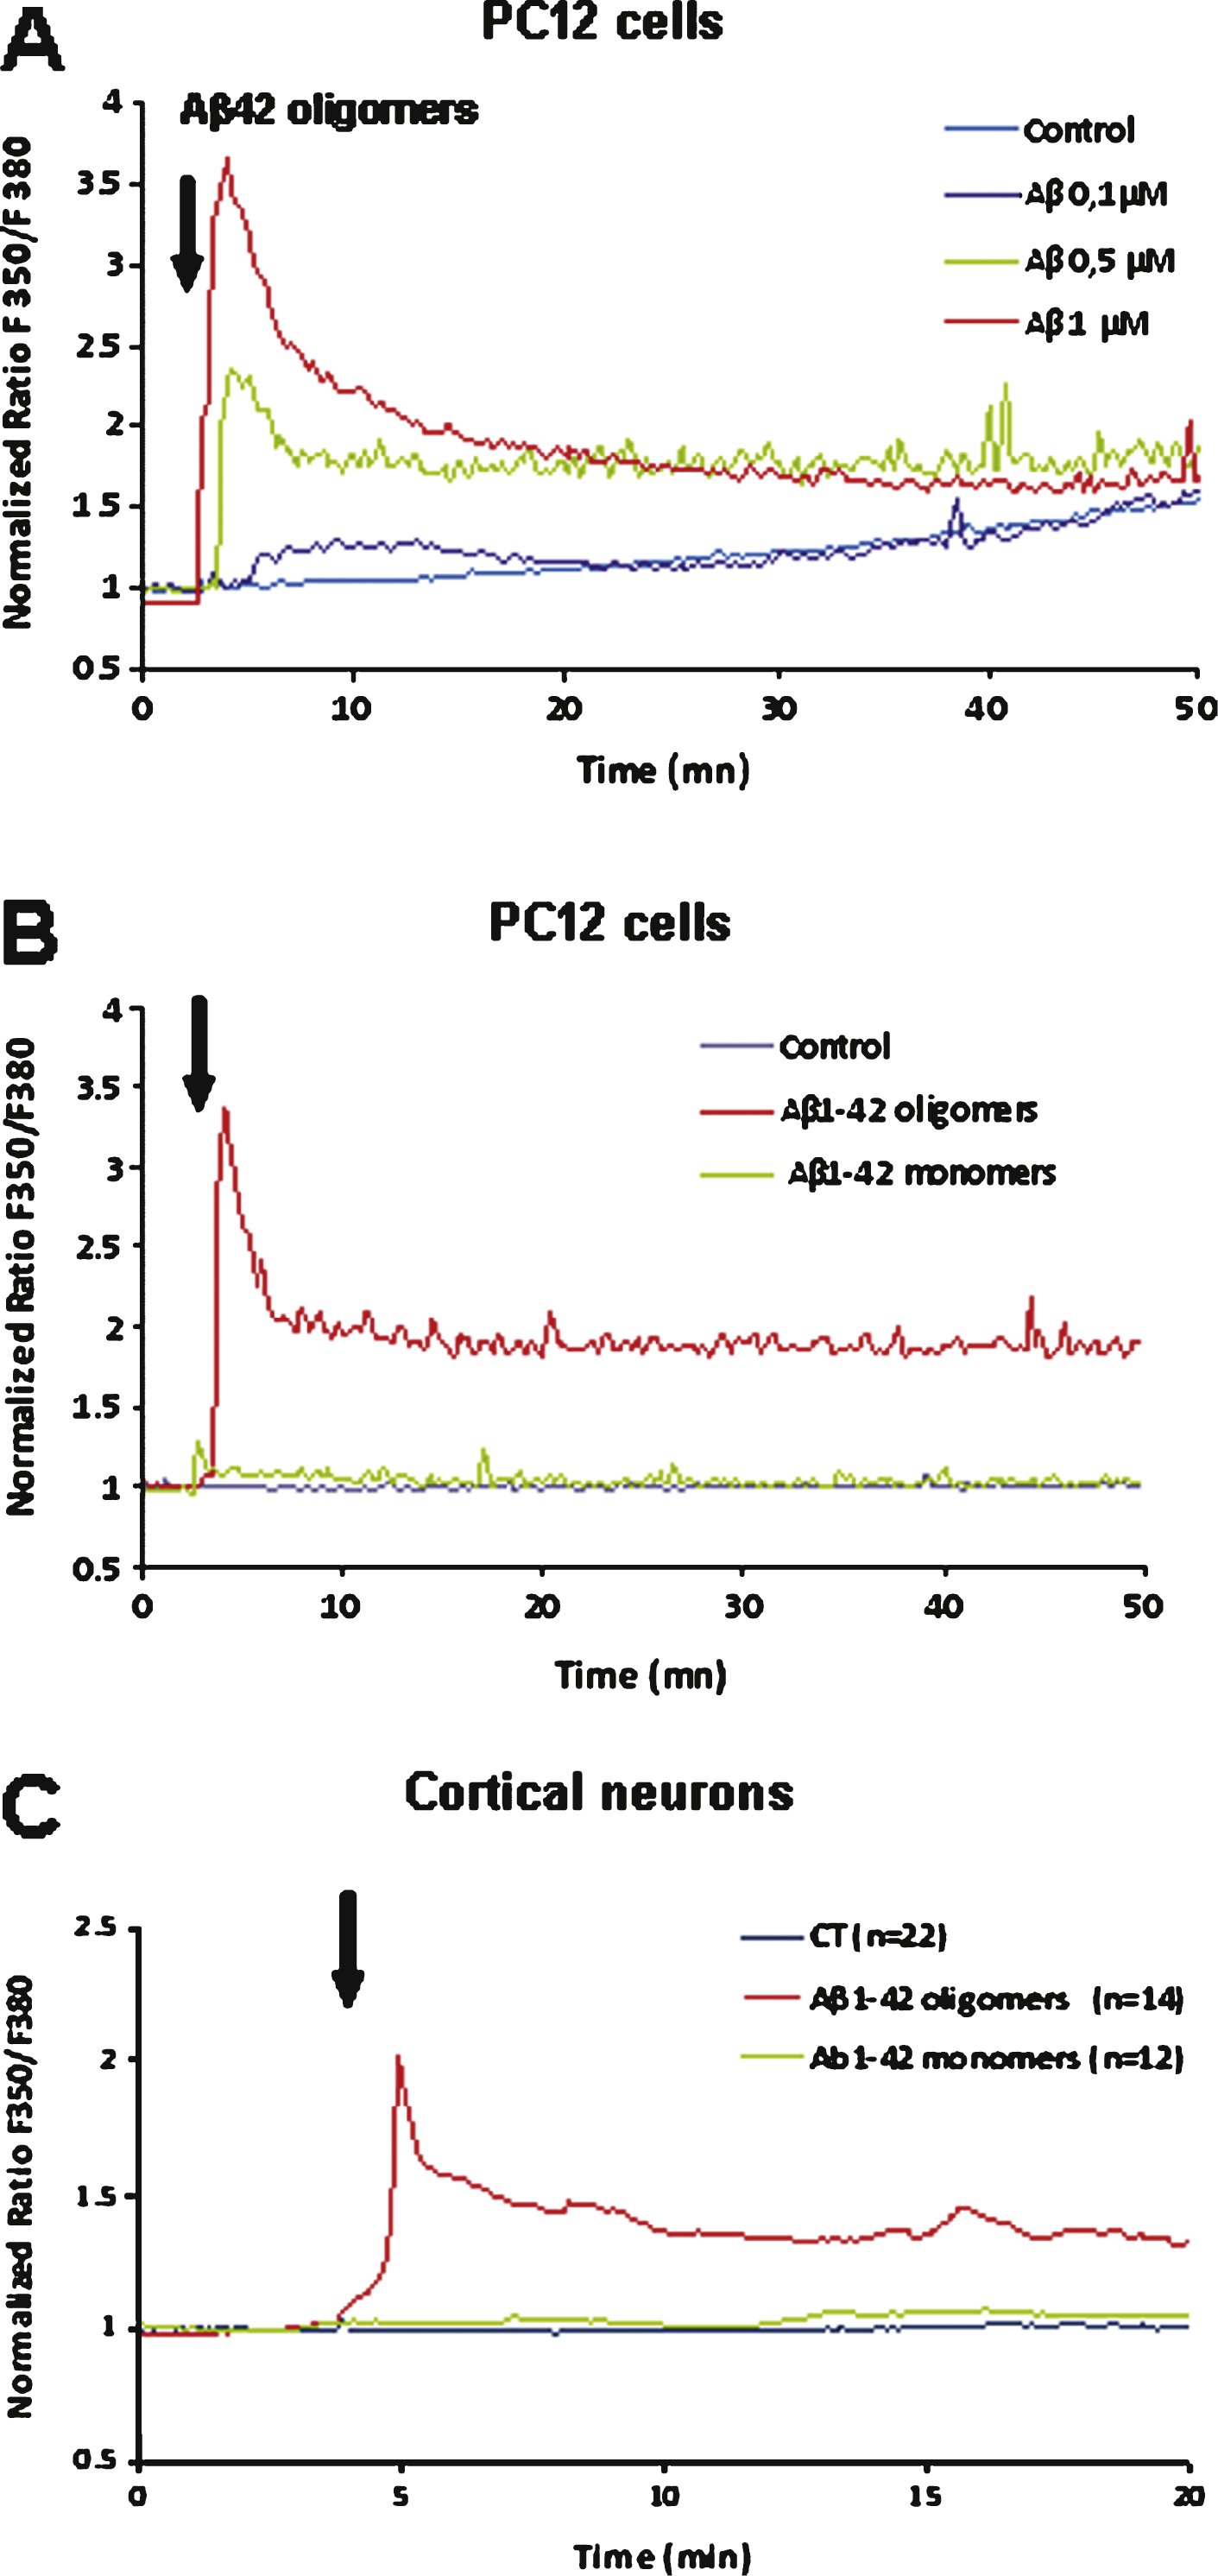 A) Aβ1–42-induced Ca2+ increase in PC12 cells. The effect induced by acute application of Aβ1–42 is dose dependent (curves are representative of the average of 50 recorded cells; control: vehicle application). B) Comparison of the Ca2+ response induced in PC12 cells after acute application of an Aβ1–42 monomer solution (1 μM) or of an Aβ1–42 oligomer solution (1 μM) as indicated by the arrow. The monomer solution induces a weak Ca2+ response as compared to the oligomer-induced response. C) Comparison of the Ca2+ response induced in cultured mouse cortical neurons after acute application of an Aβ1–42 monomer solution (1 μM) or of an Aβ1–42 oligomer solution (1 μM). No significant response was induced by monomers application.